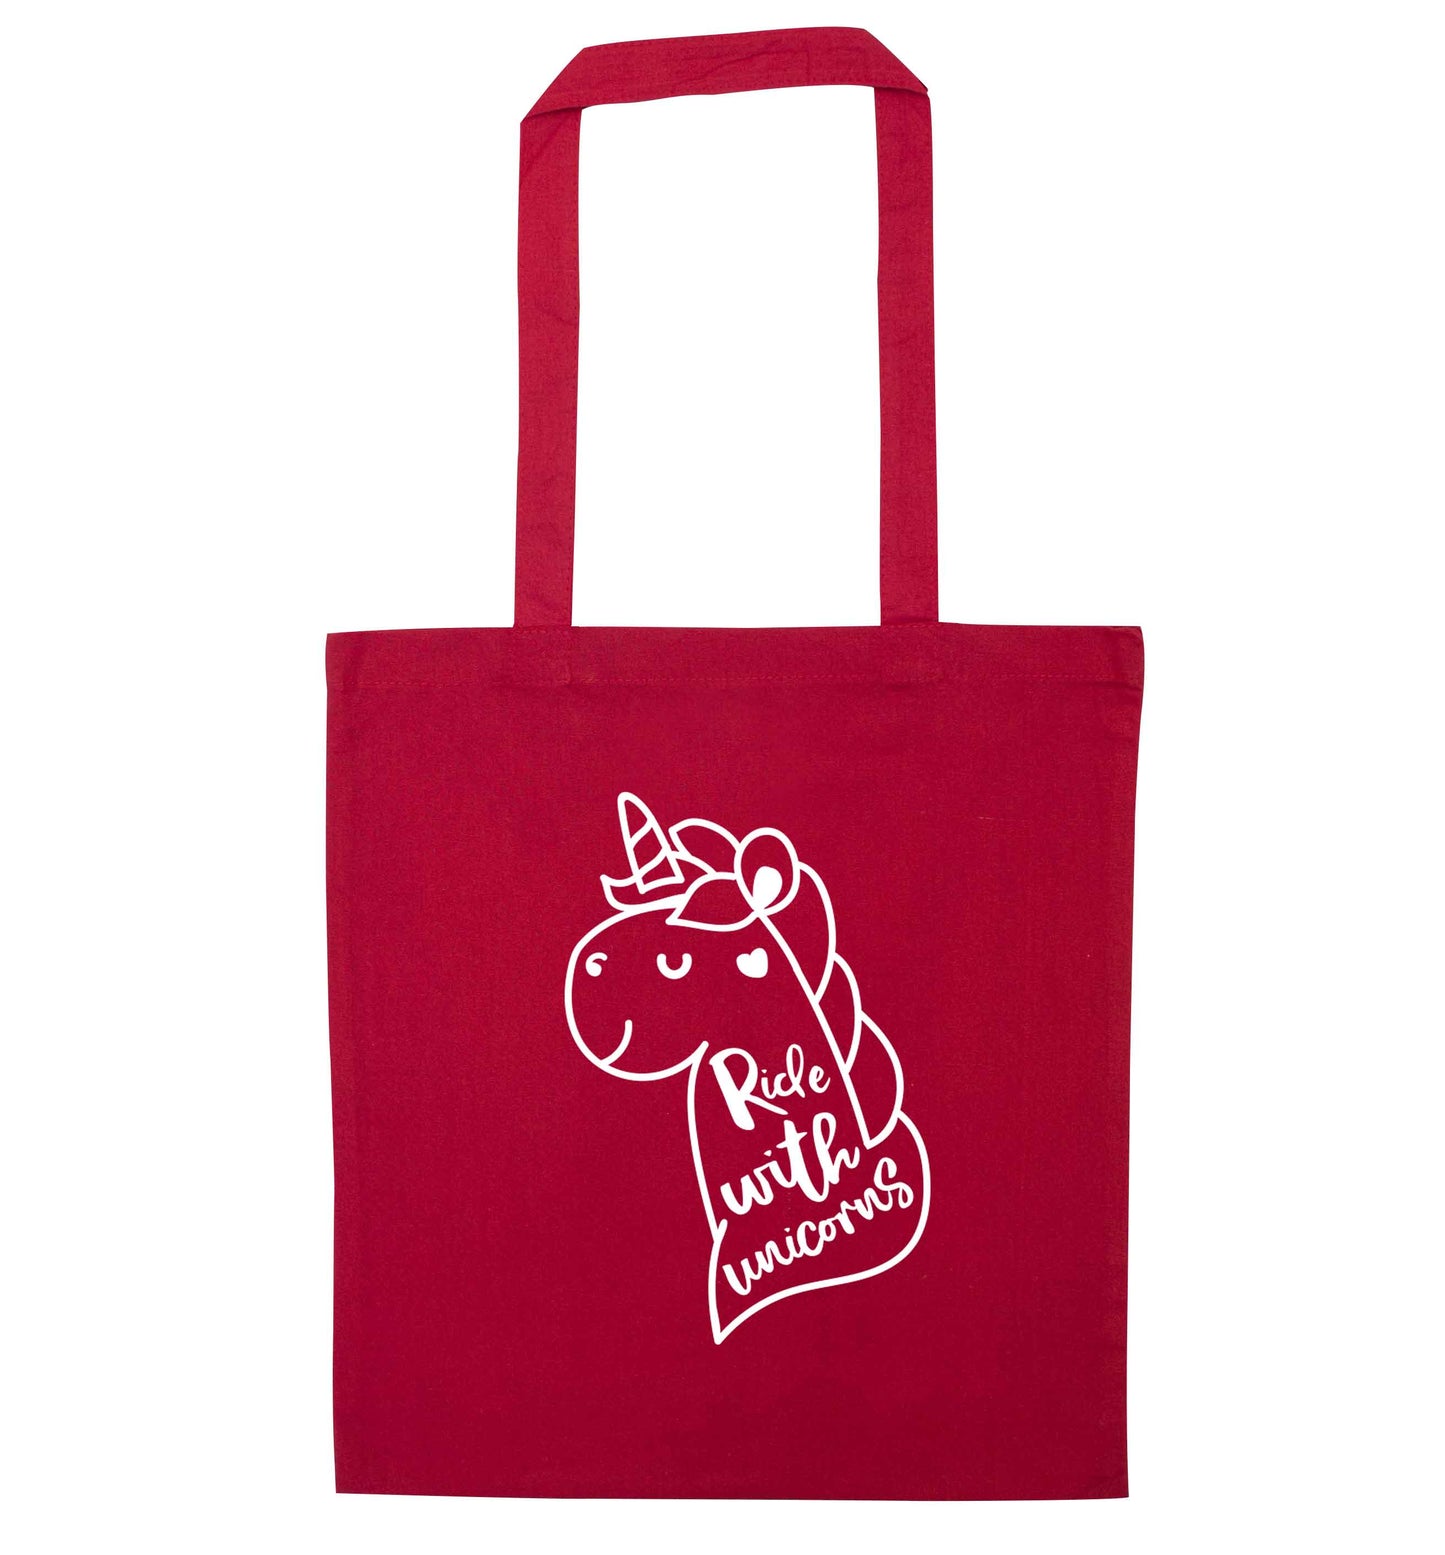 Ride with unicorns red tote bag